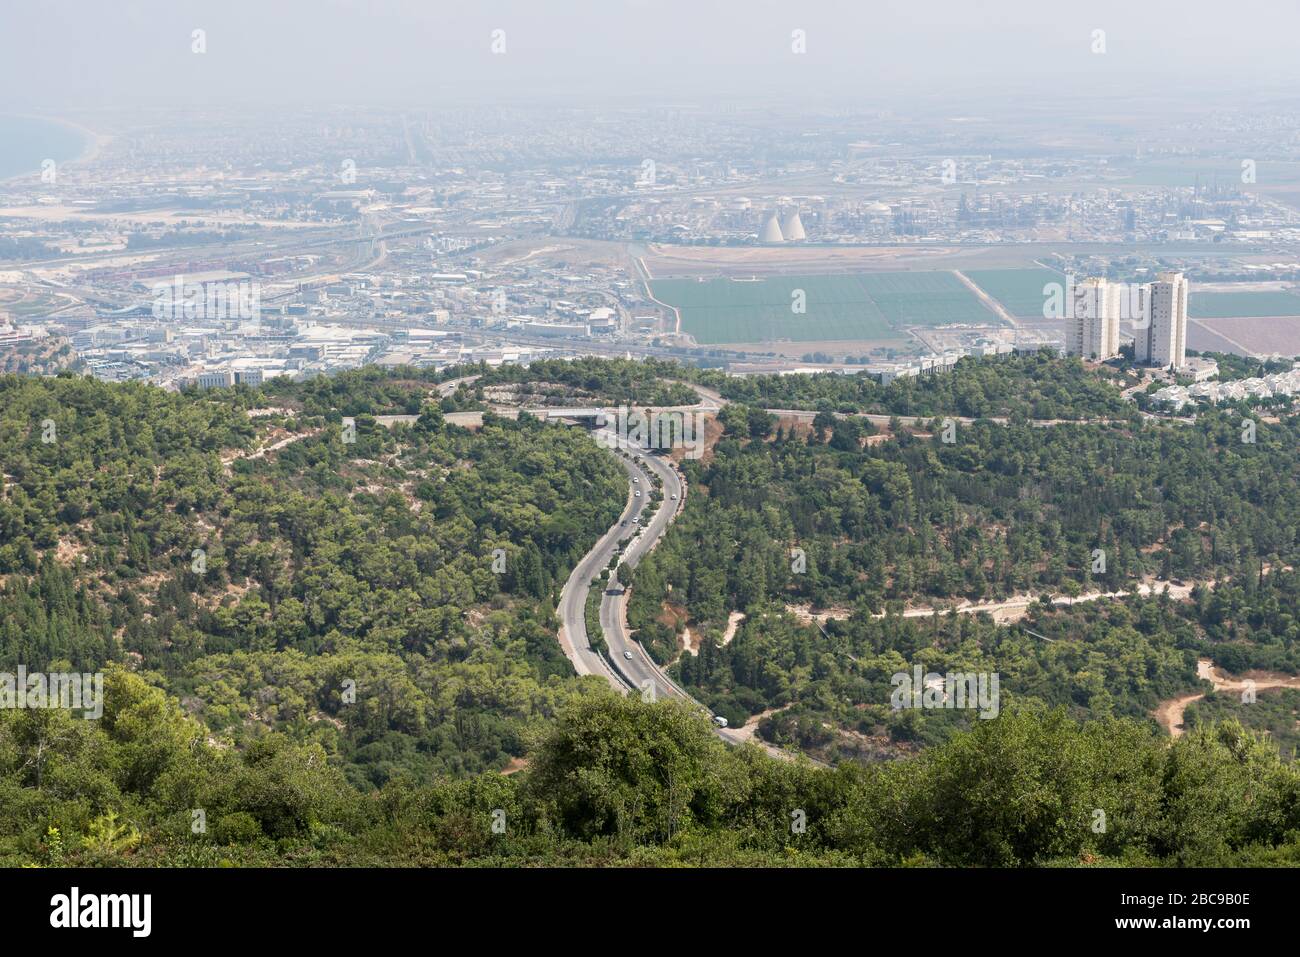 Haifa view from university observation deck, Israel Stock Photo